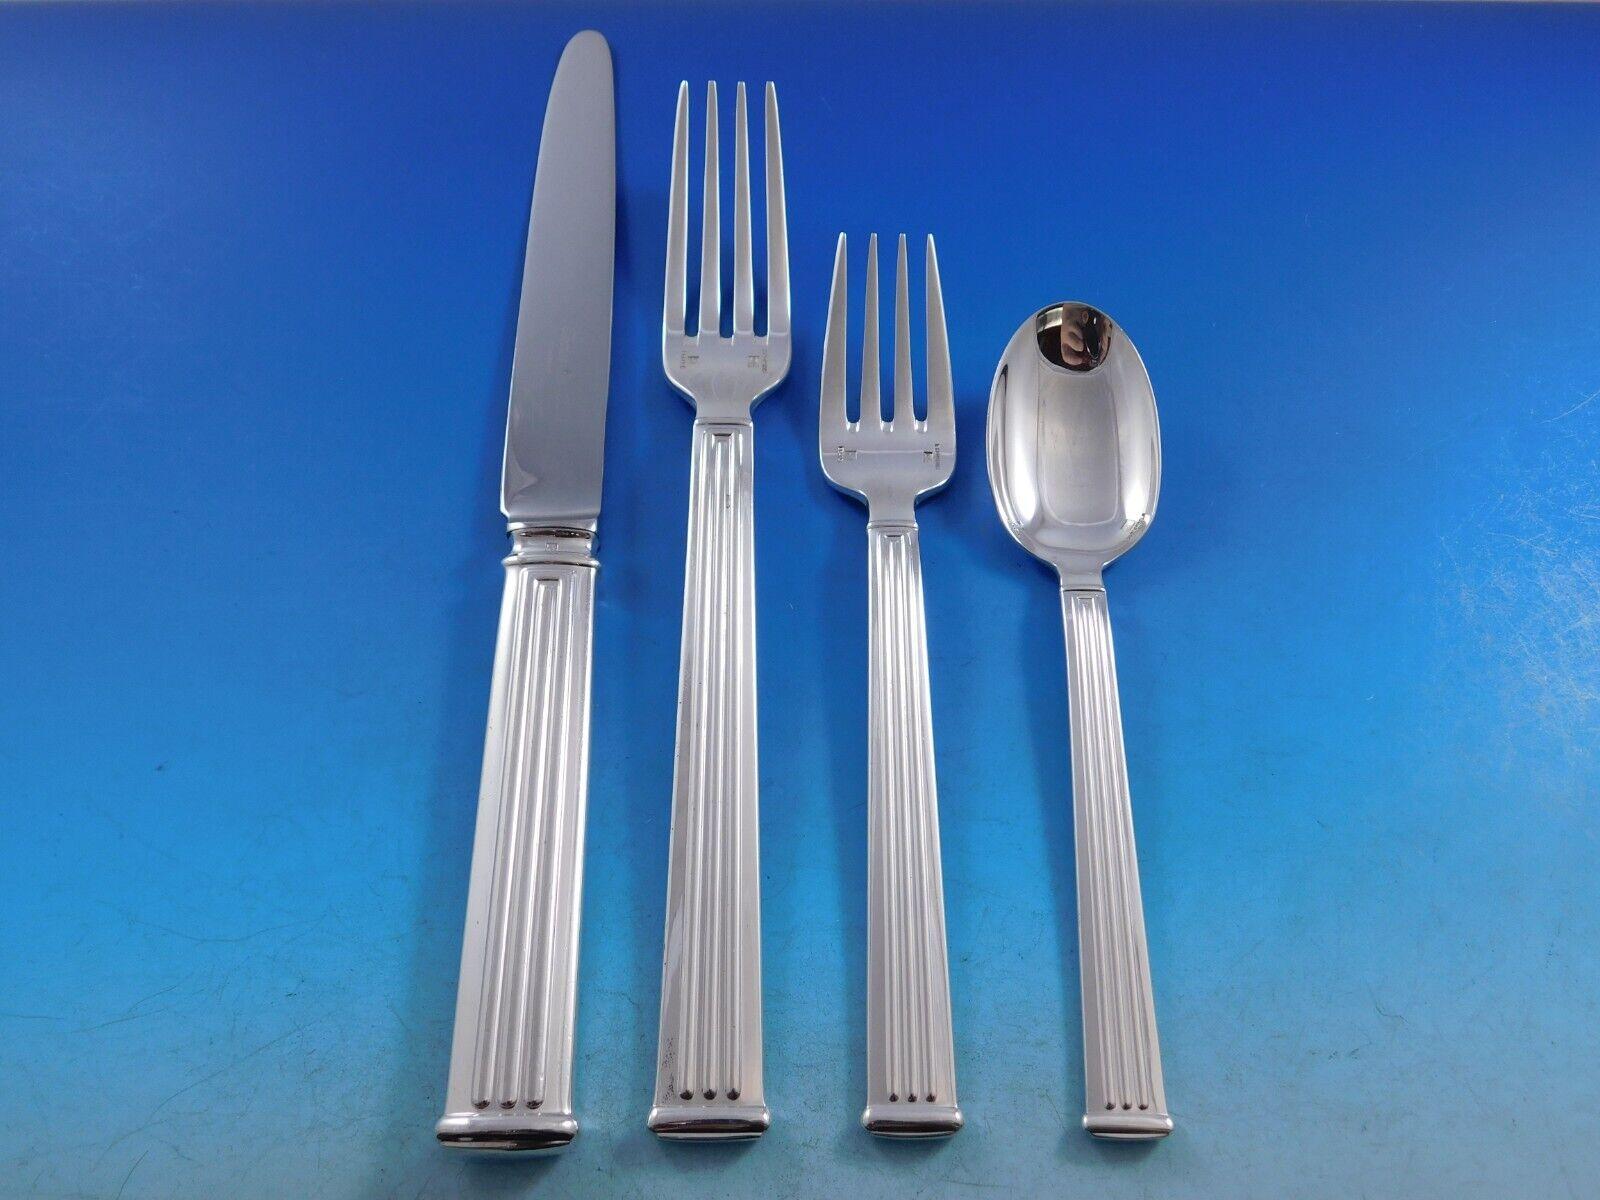 Modern clean lines in a Classic column motif makes this pattern, Triade, forever timeless. 
Dinner Size Triade by Christofle France Silverplated Flatware set - 76 pieces. This set includes:

12 Dinner Knives, 9 3/4